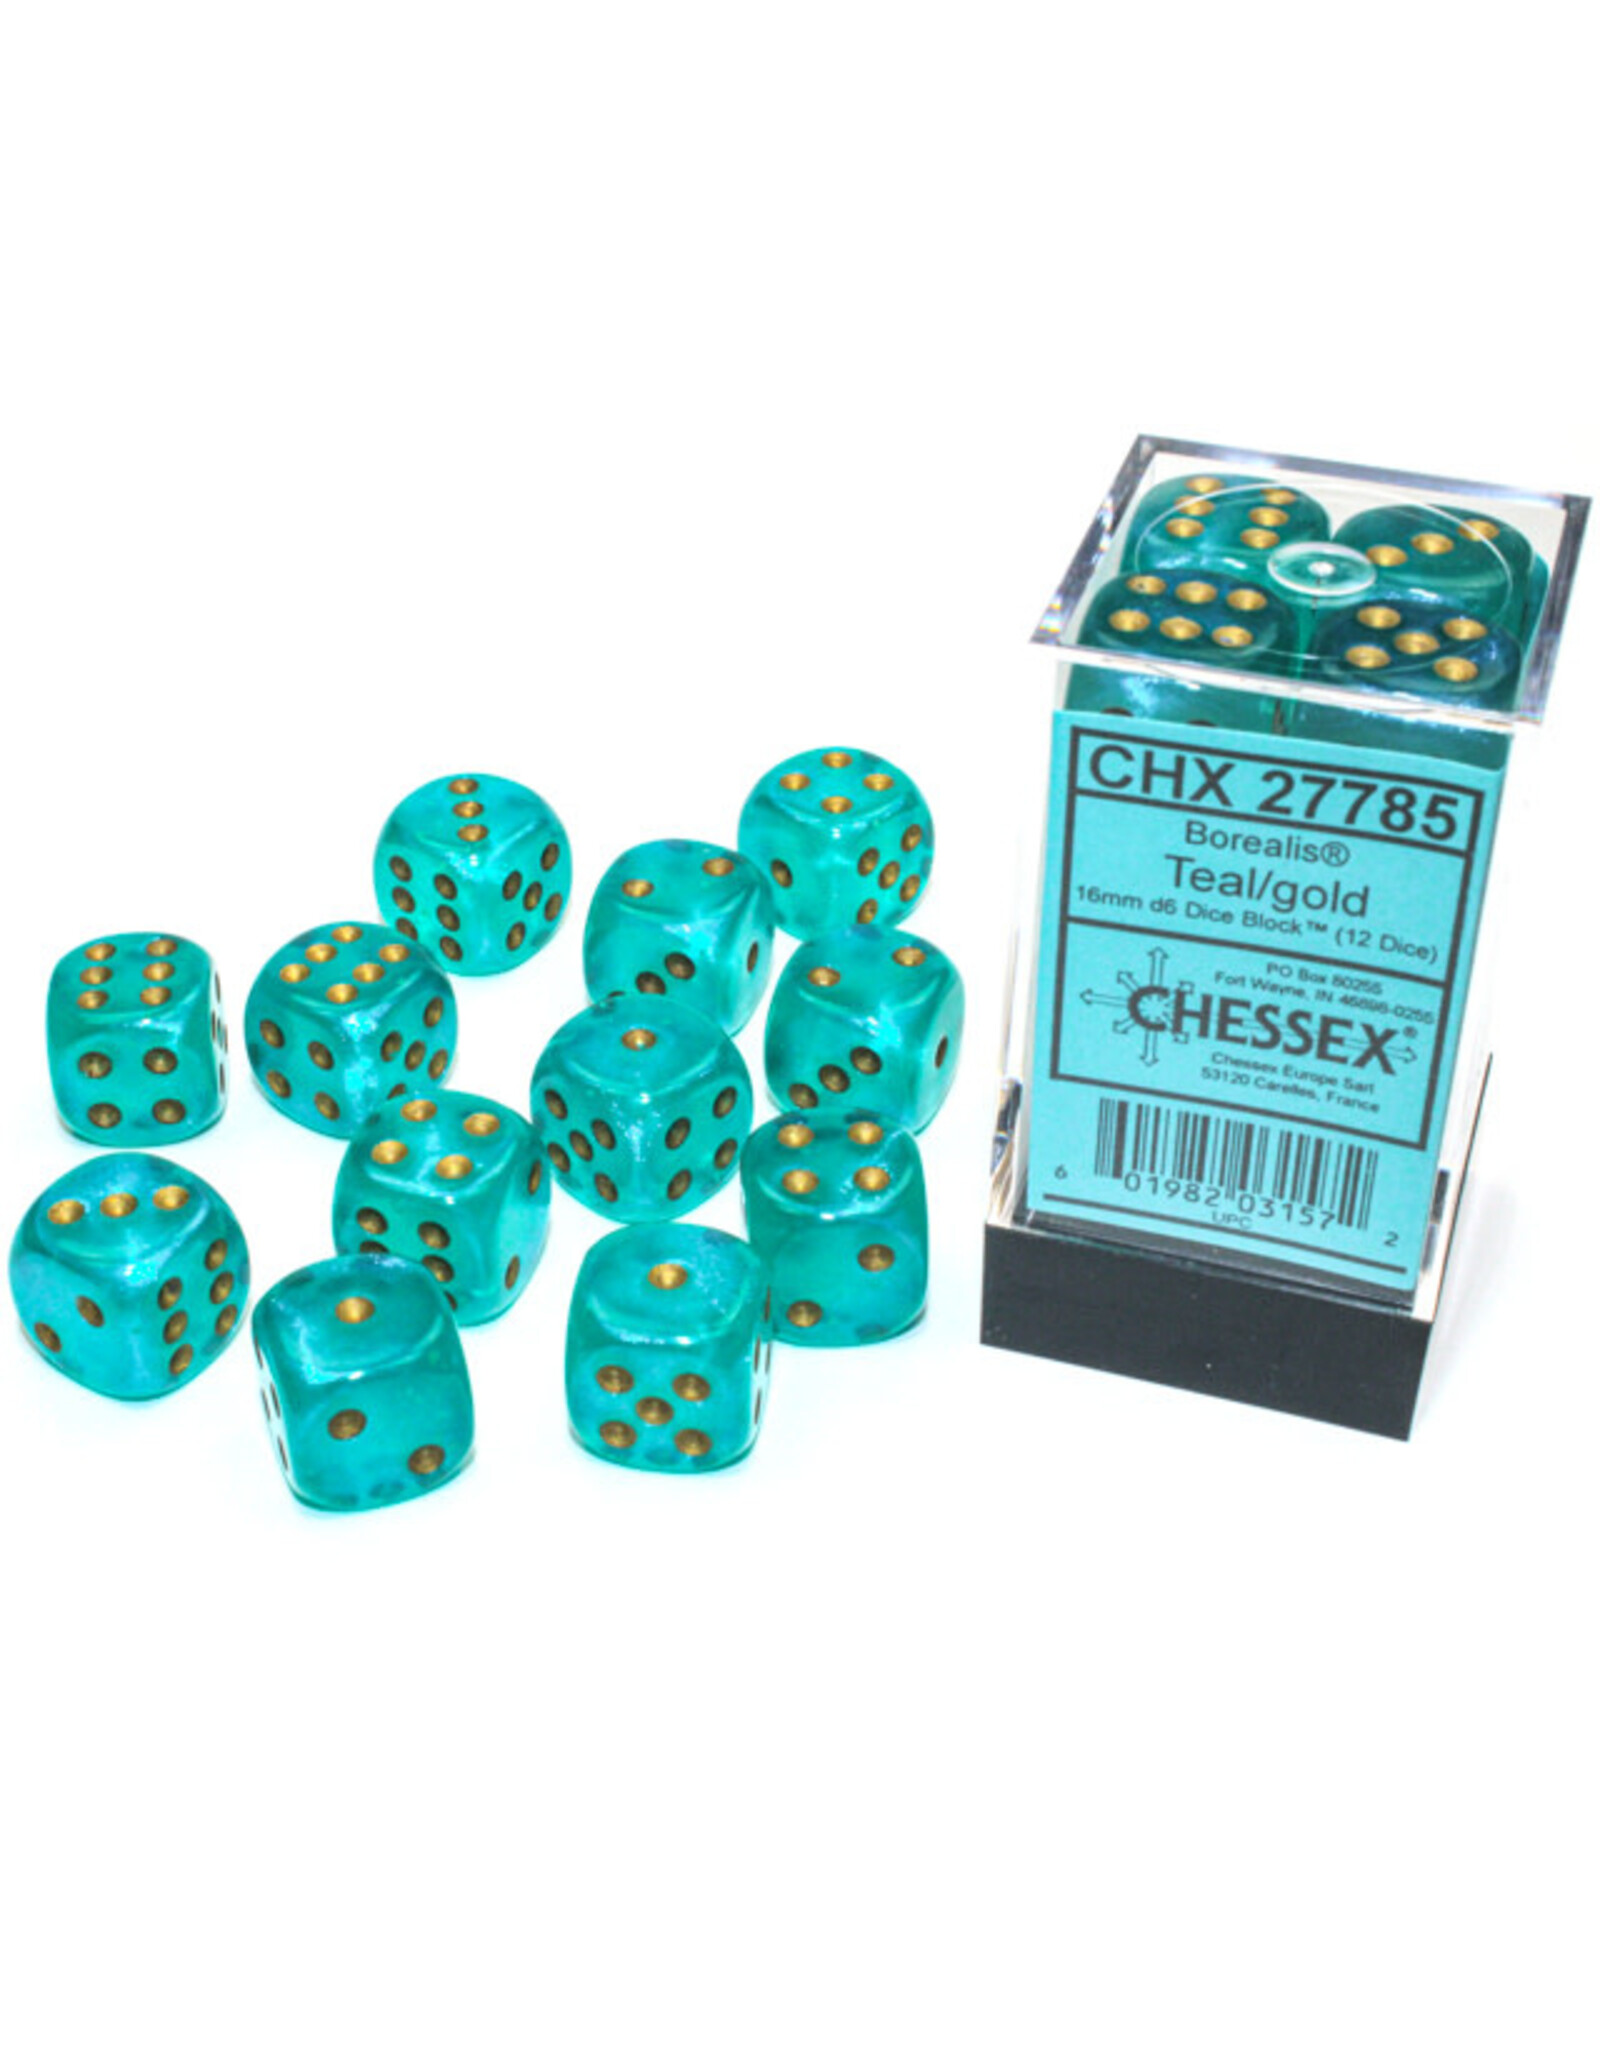 Chessex - Borealis Teal/Gold